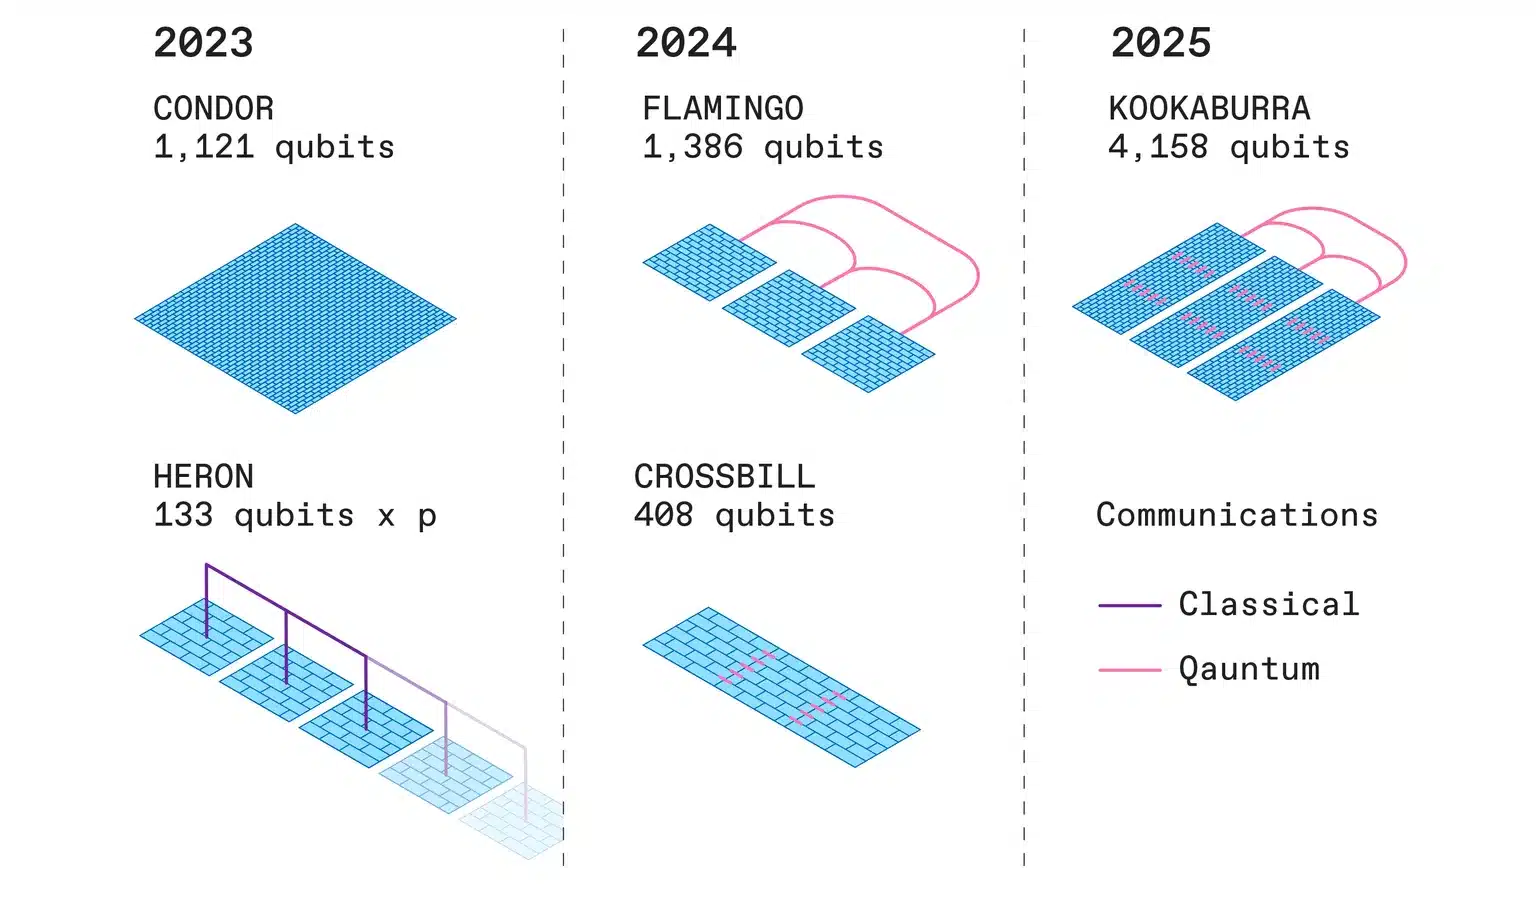 this diagram shows the quantum processors that ibm expects to have ready in 2023 condor and heron in 2024 flamingo and cross